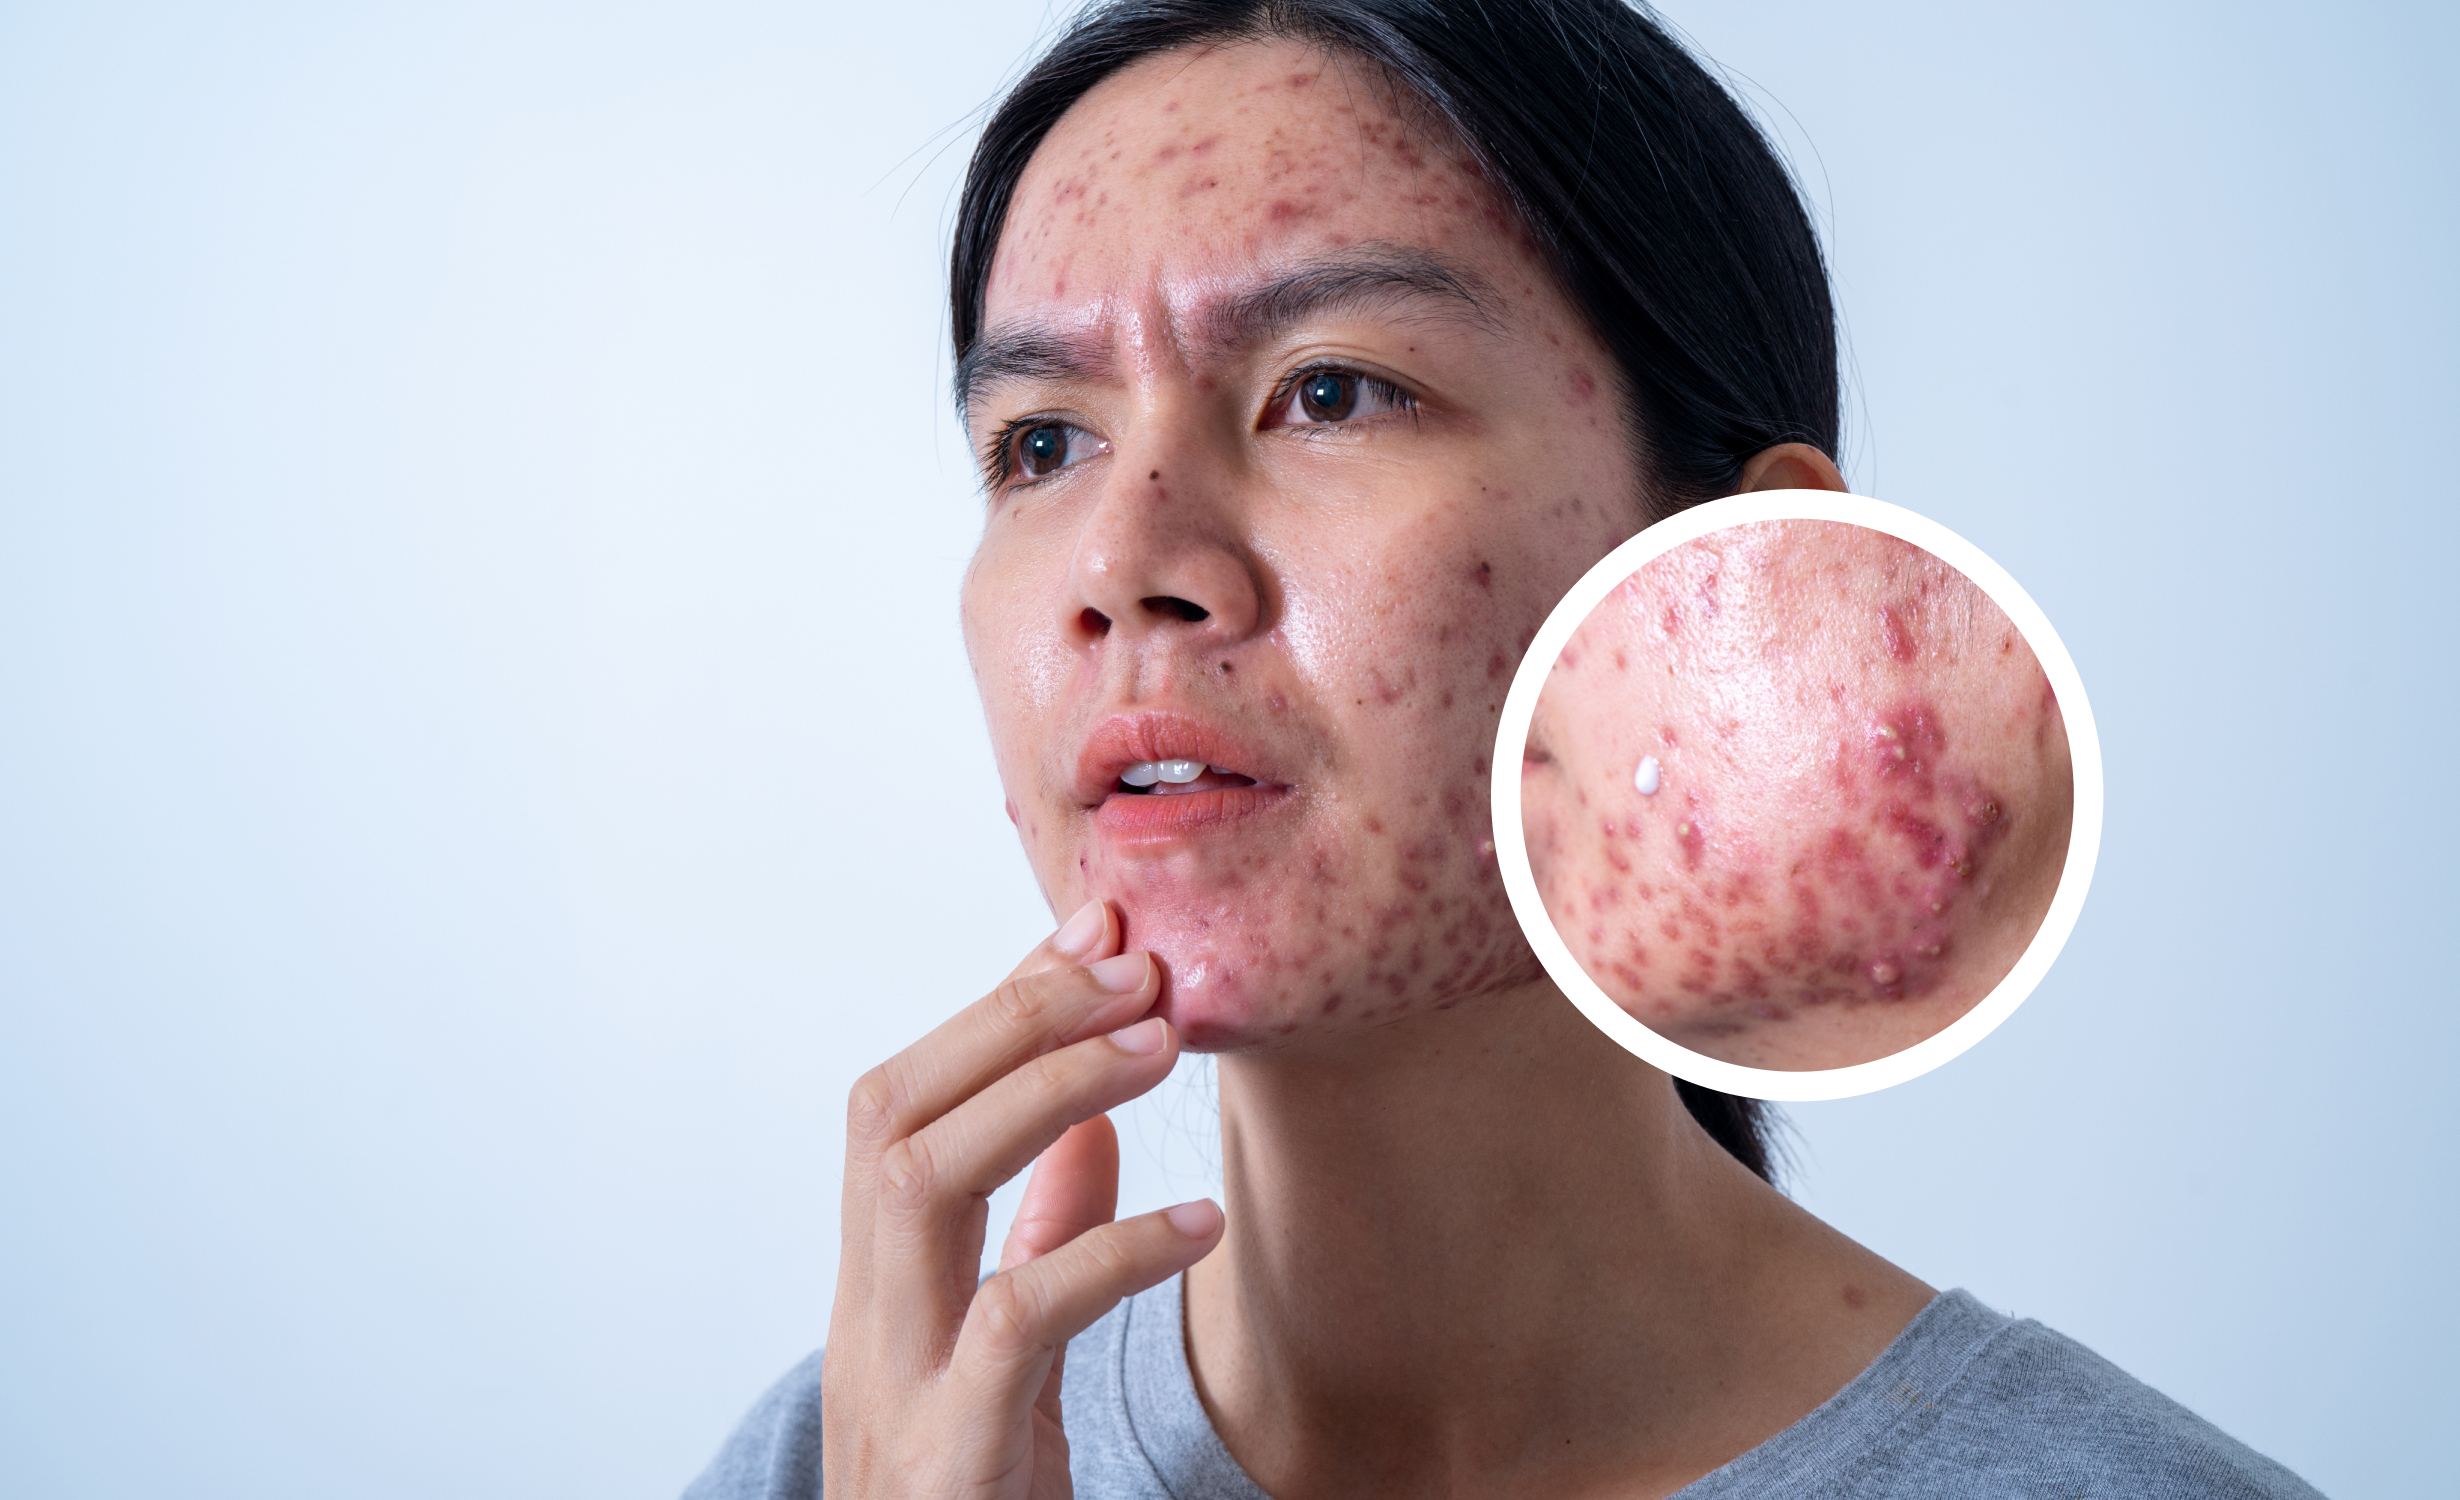 A close-up image of a person experiencing severe acne breakouts. An inset magnifies a section of the skin, highlighting the inflamed and pustular nature of the acne.